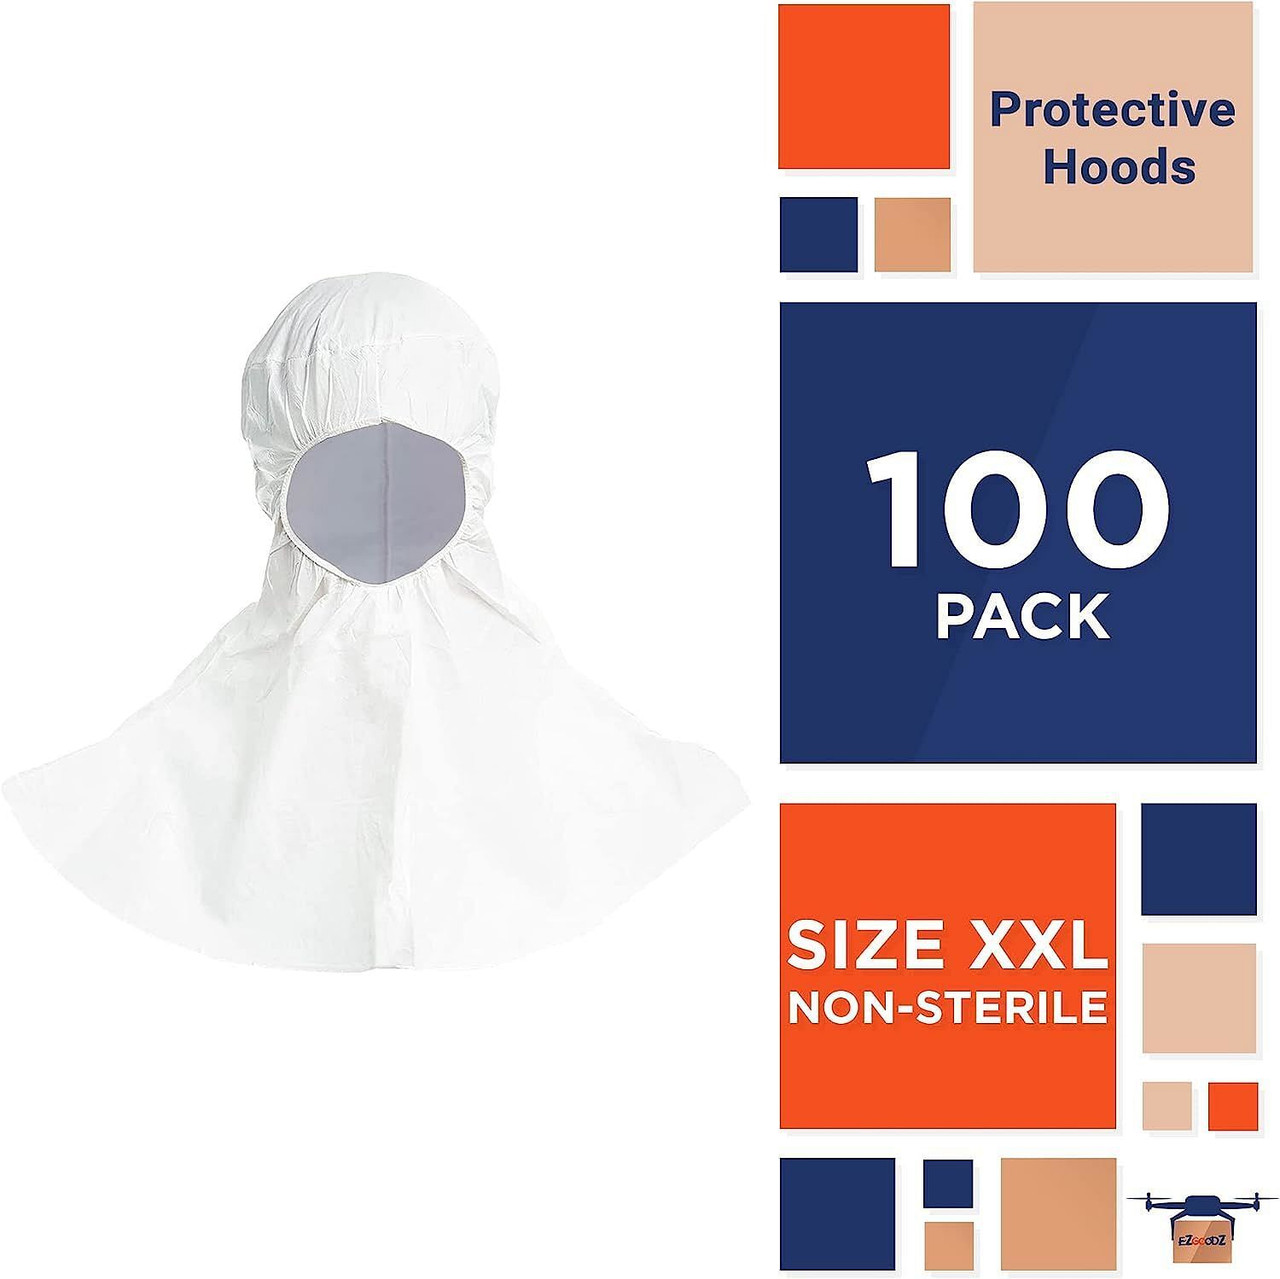 Protective Hoods in Bulk. Pack of 100 Non-Sterile White XX-Large Microporous 60 gsm Hooded Caps. Di